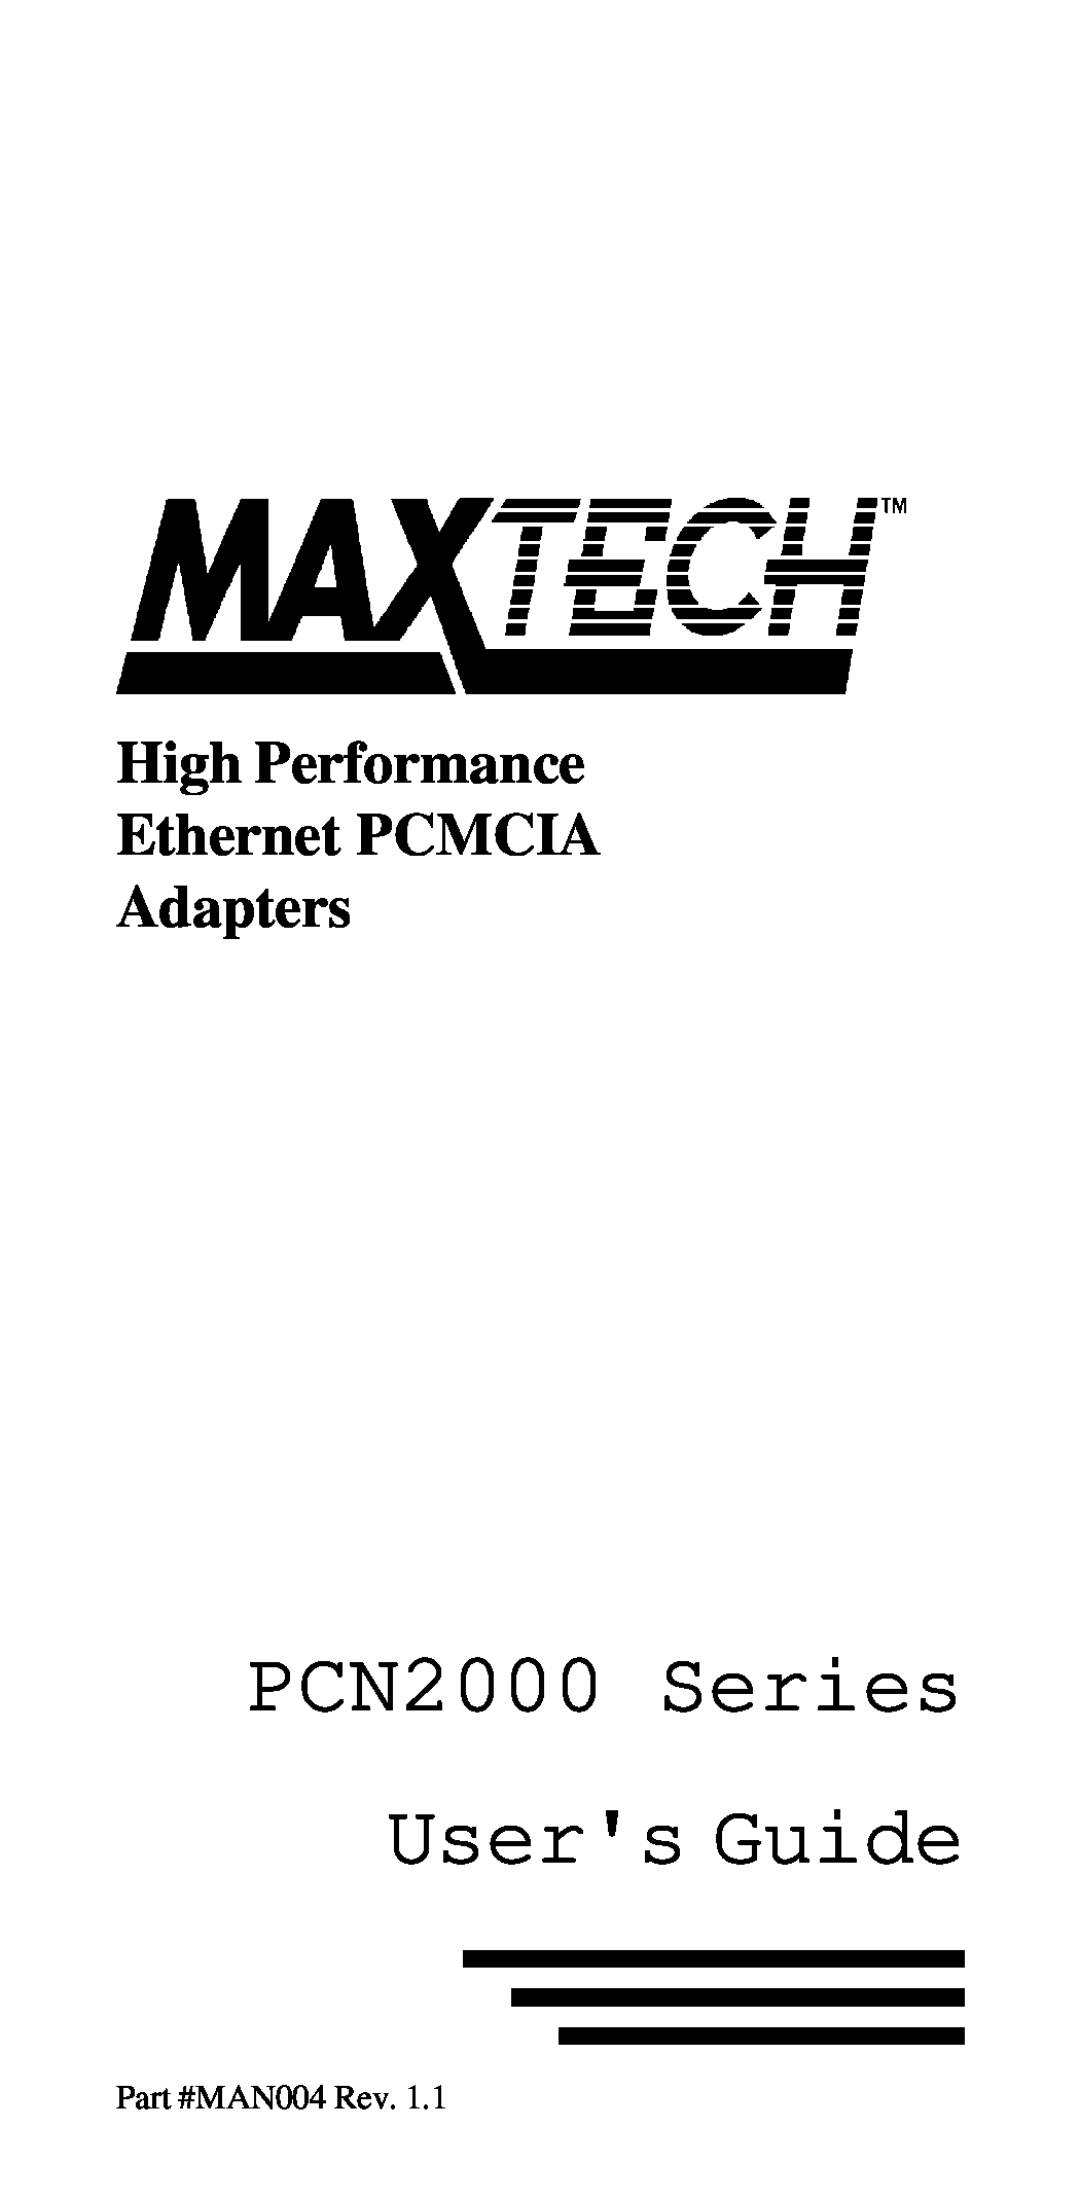 MaxTech manual High Performance Ethernet PCMCIA Adapters, PCN2000 Series Users Guide 